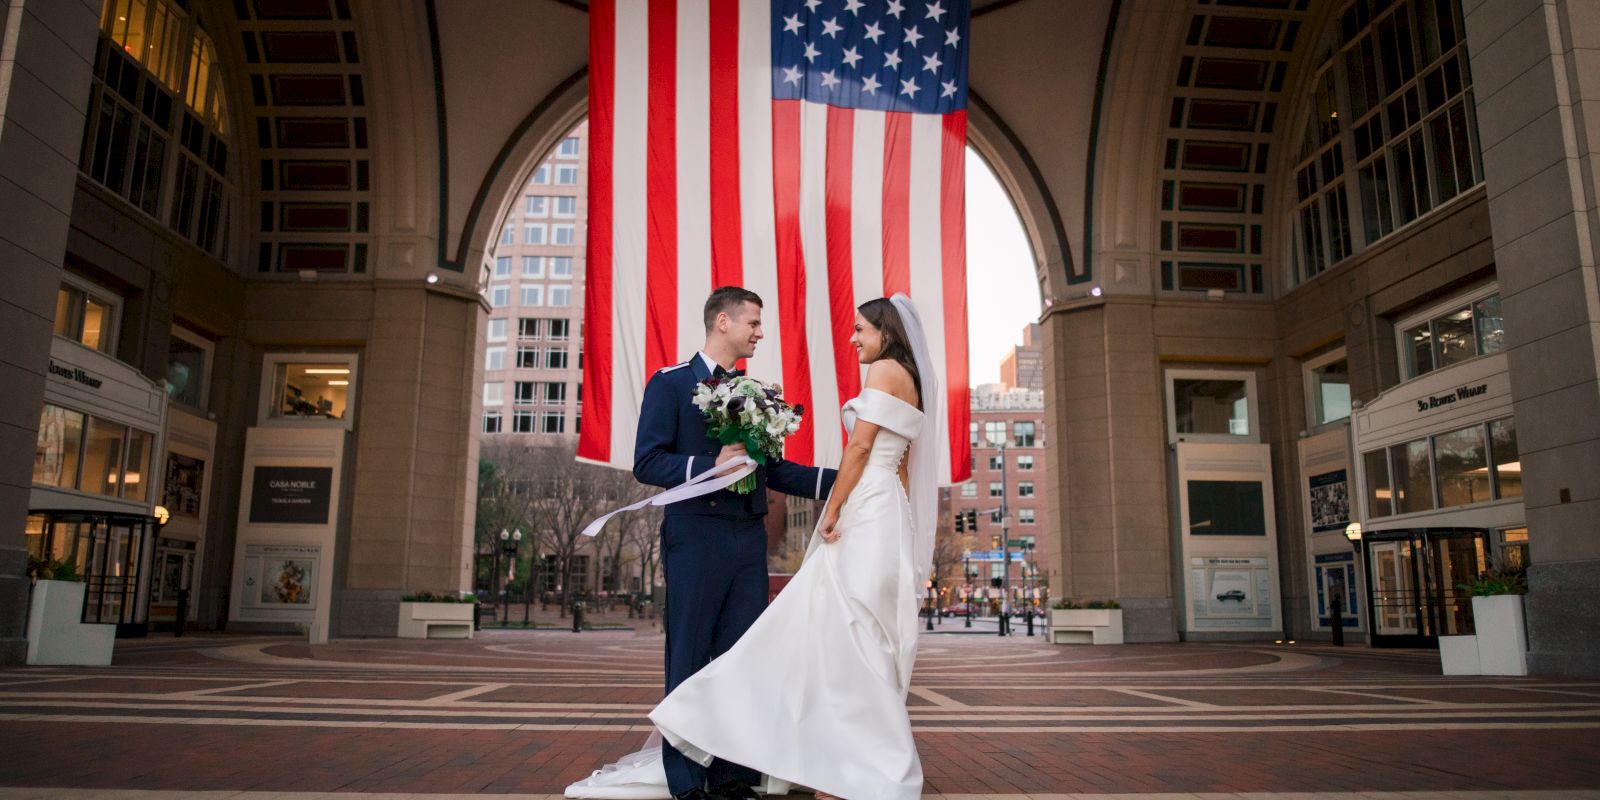 A couple in wedding attire poses under a large American flag in an open building atr